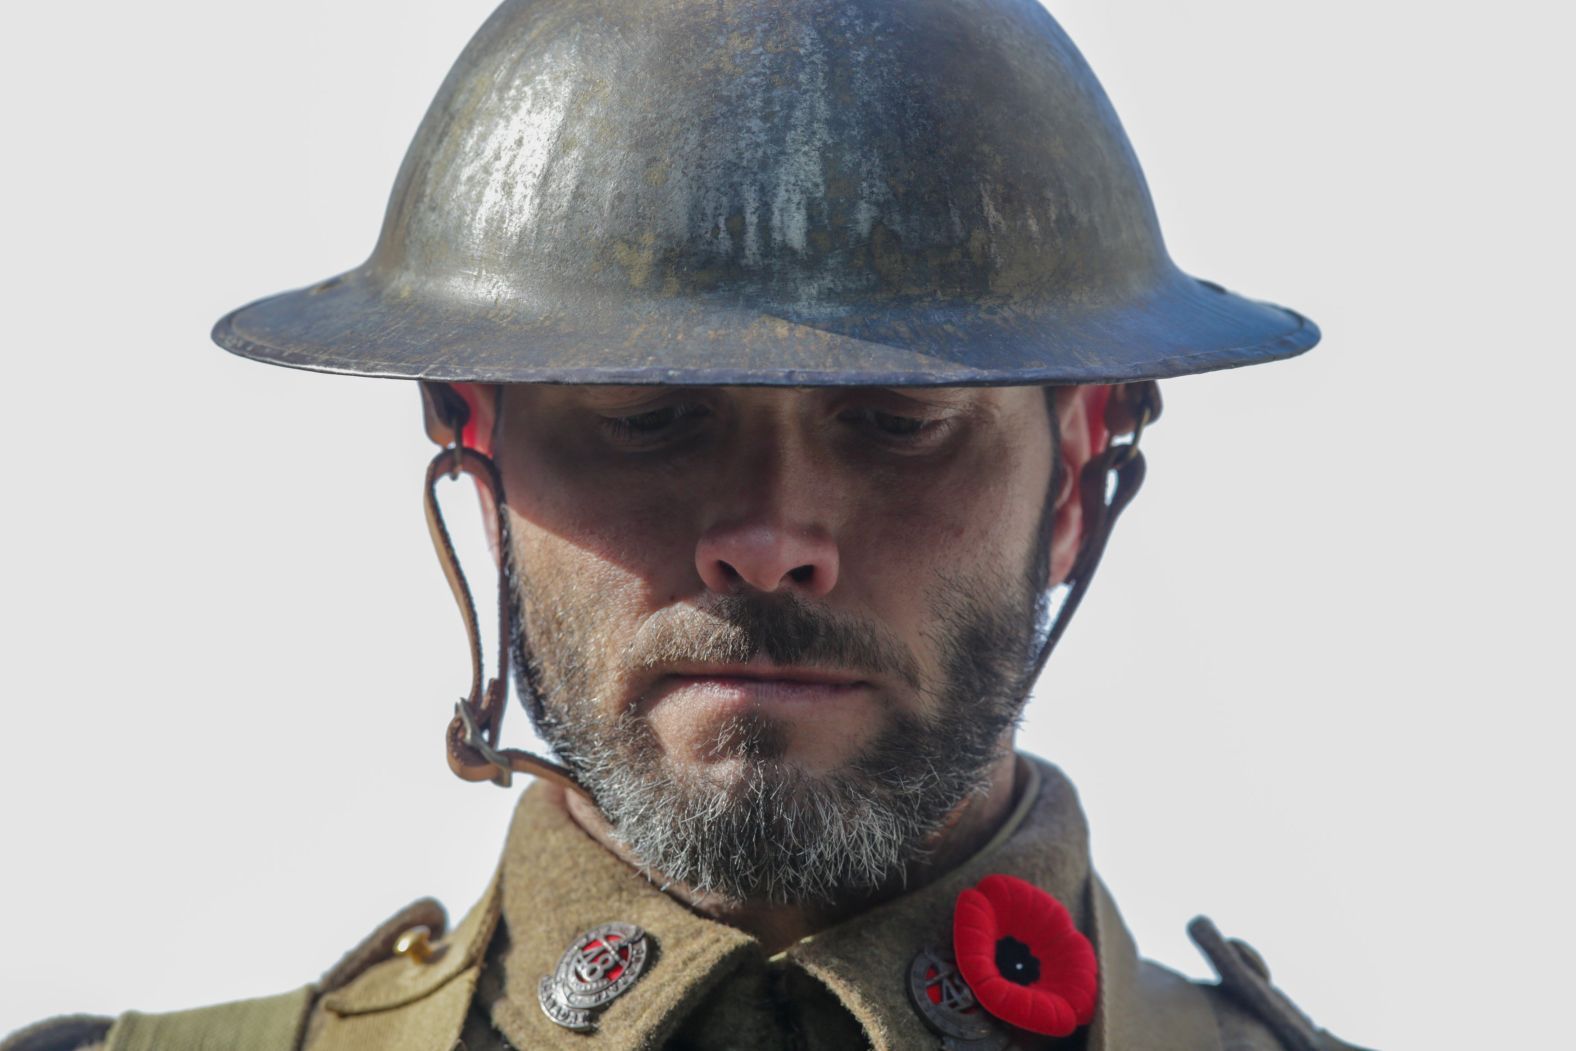 A Canadian soldier wearing a uniform dating to World War I guards a monument during a ceremony in Toronto on Sunday.